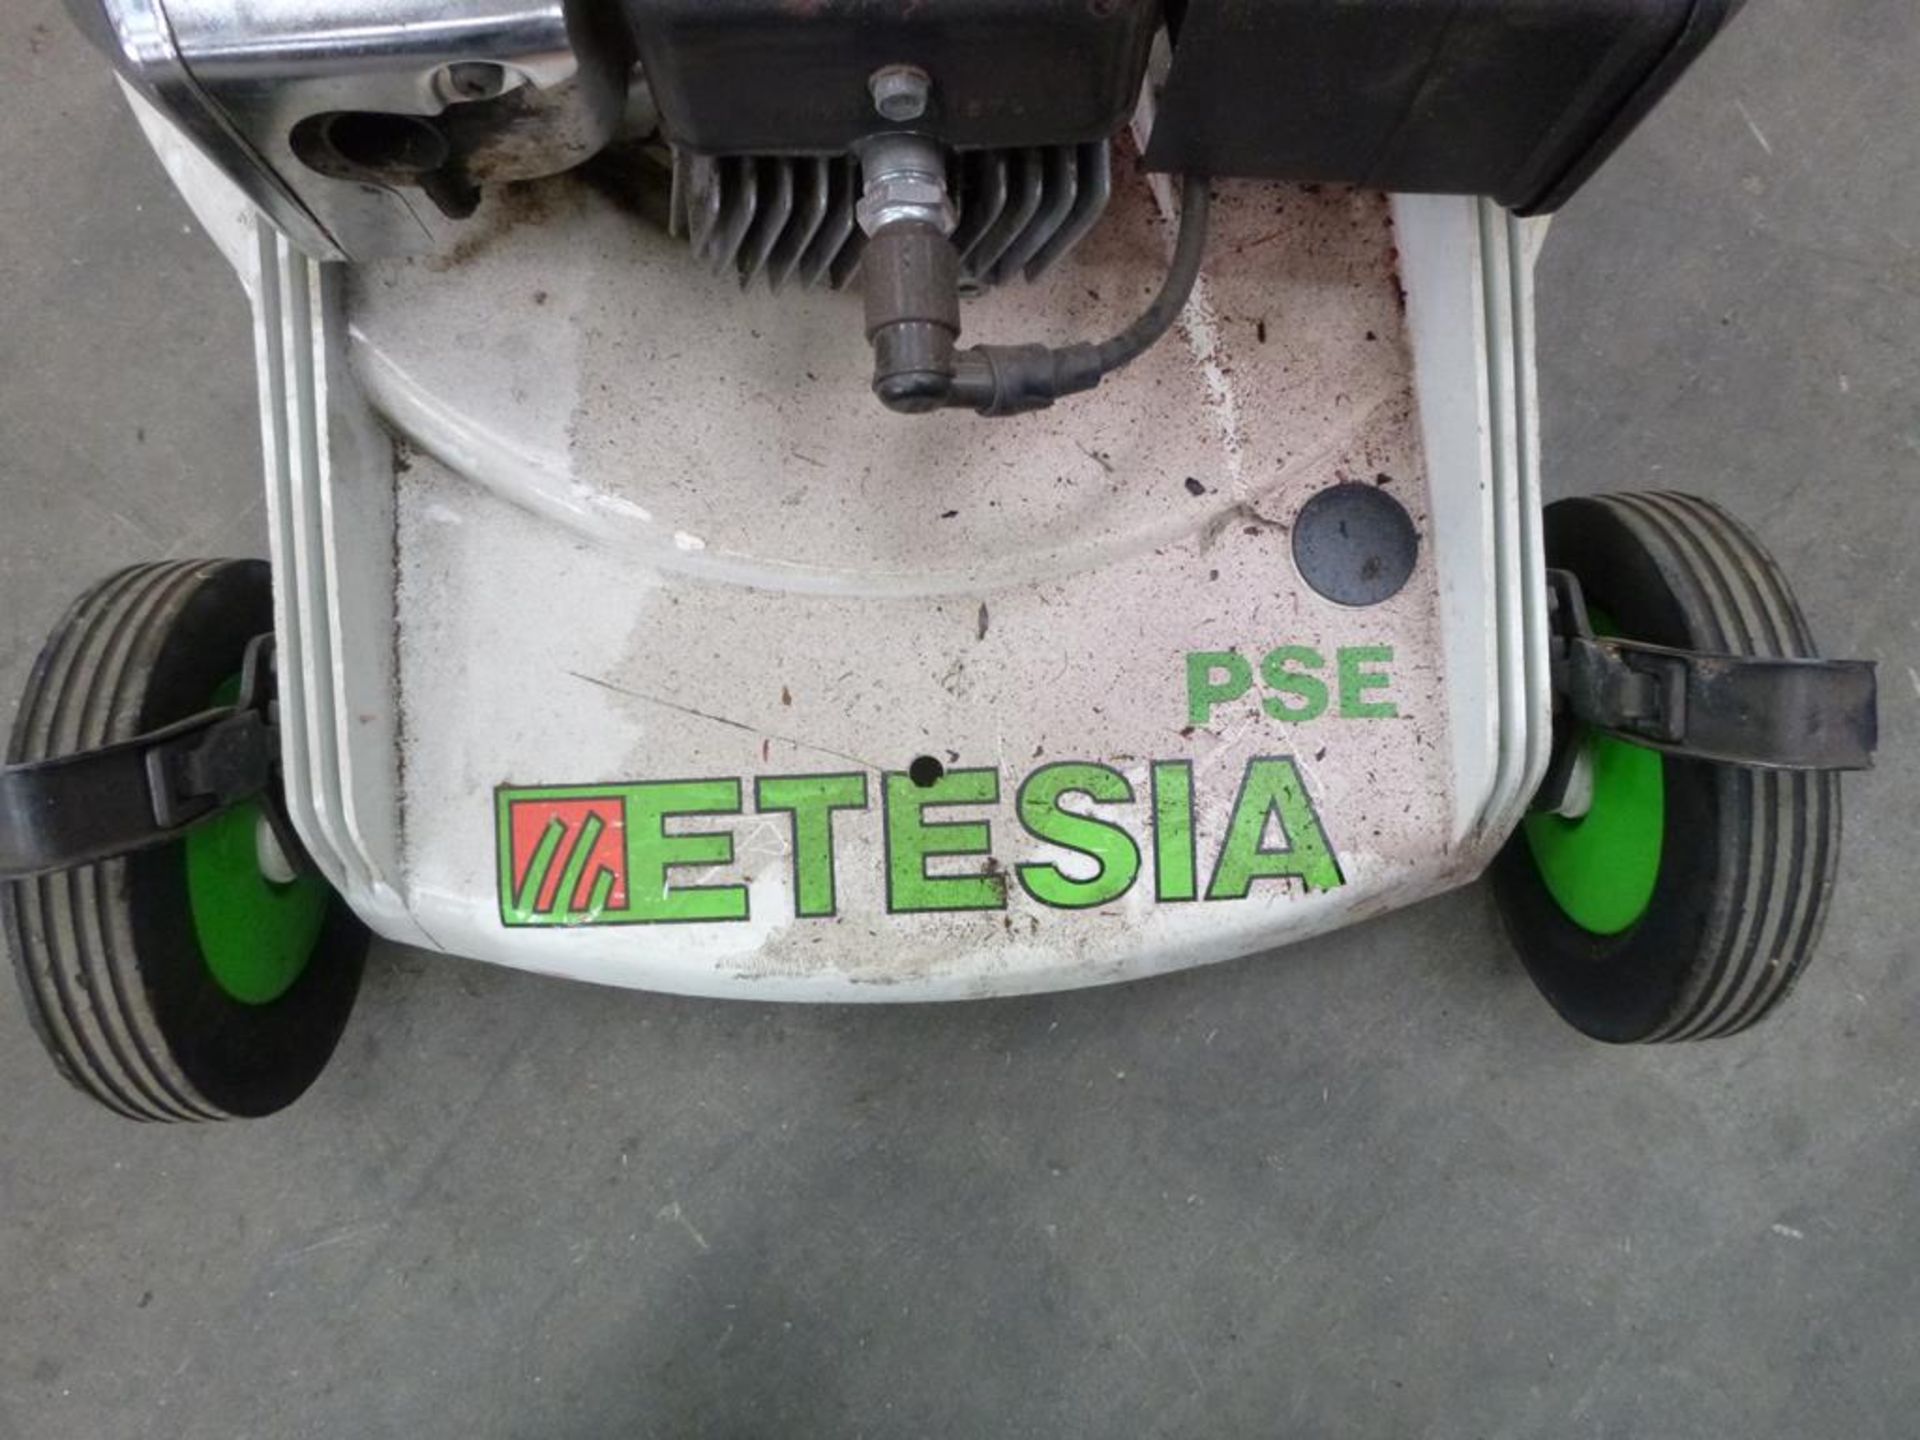 A Reconditioned Etesia Petrol Lawnmower F-67160, 18'', 2-Stroke Rotary. Shop Price £325 - Image 2 of 3